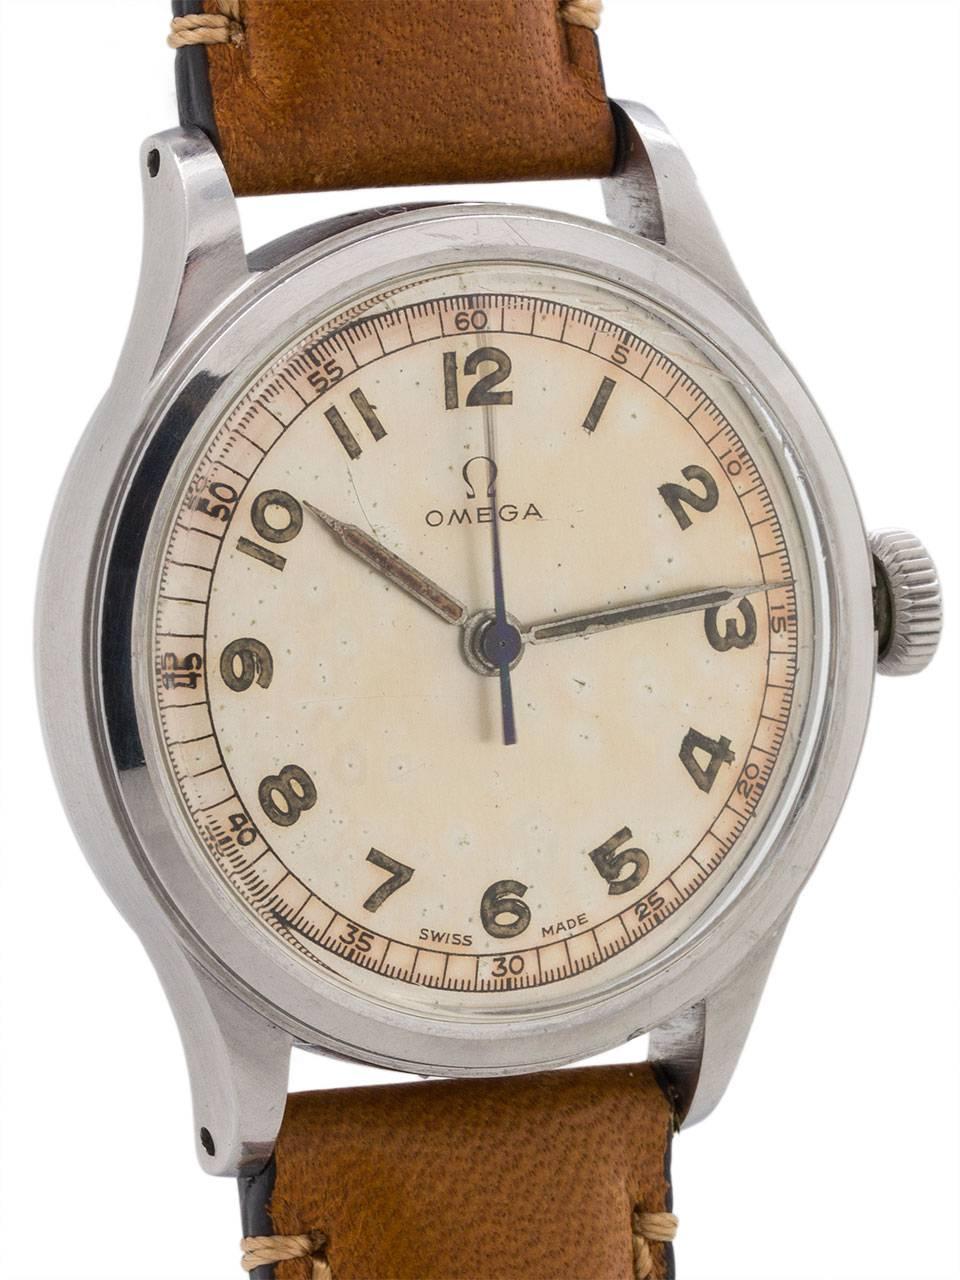 
An exceptional example of the very popular U.S. Army engraved case back ref# 2179/3 Omega manual wind military model circa 1940s. Featuring a robust 34 x 42mm case with screw down caseback with shallow engraved U.S. Army, and a beautiful matte